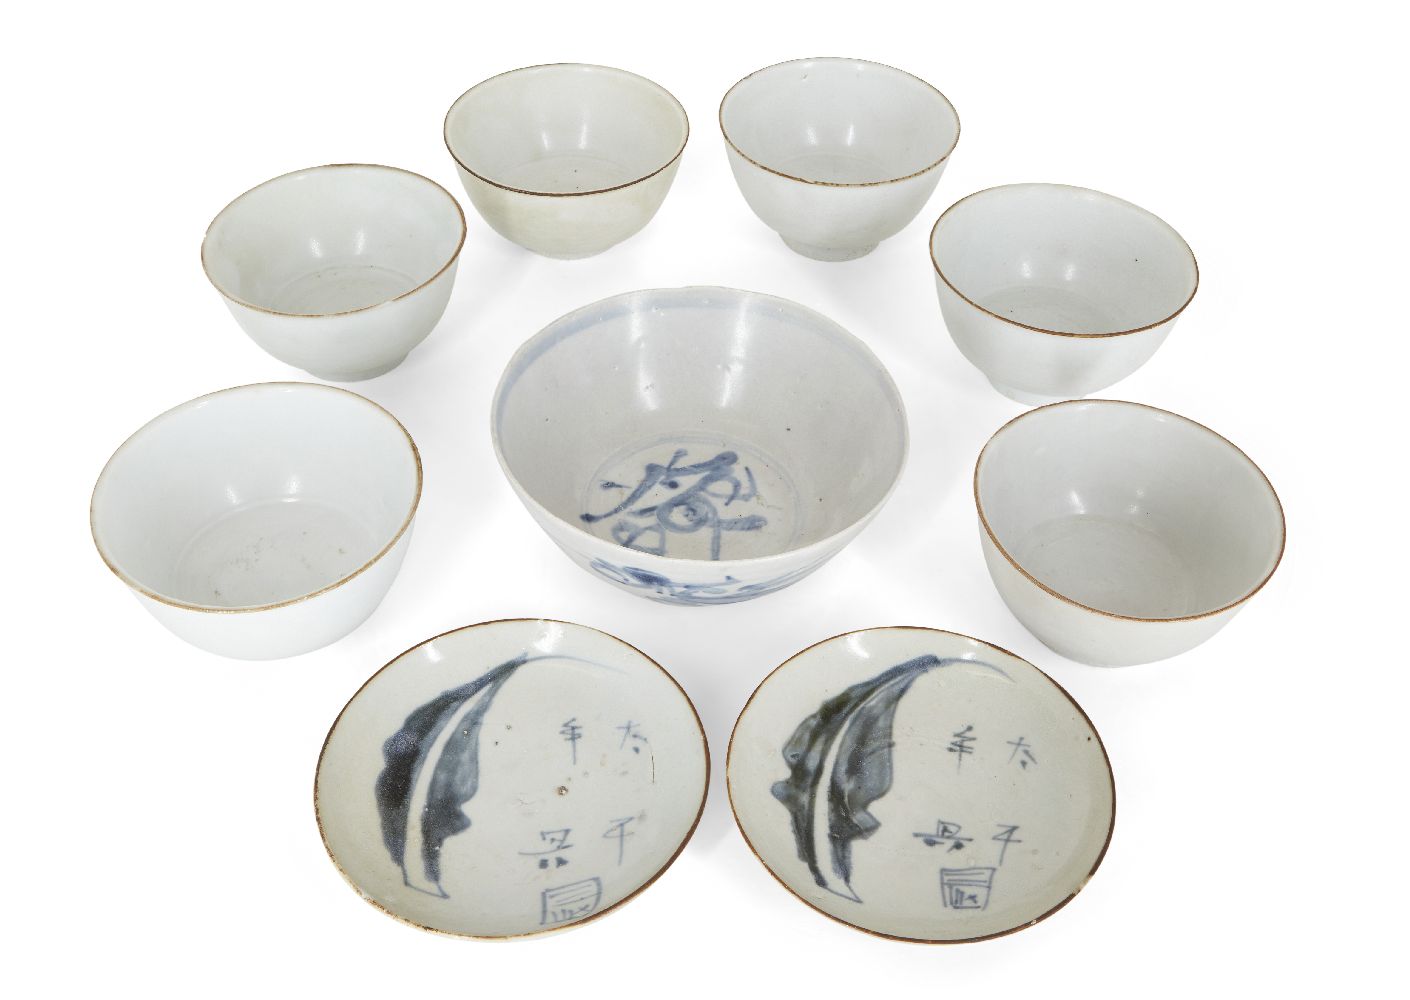 Nine pieces of Chinese porcelain excavated from the Vung Tau Cargo, circa 1690, comprising six